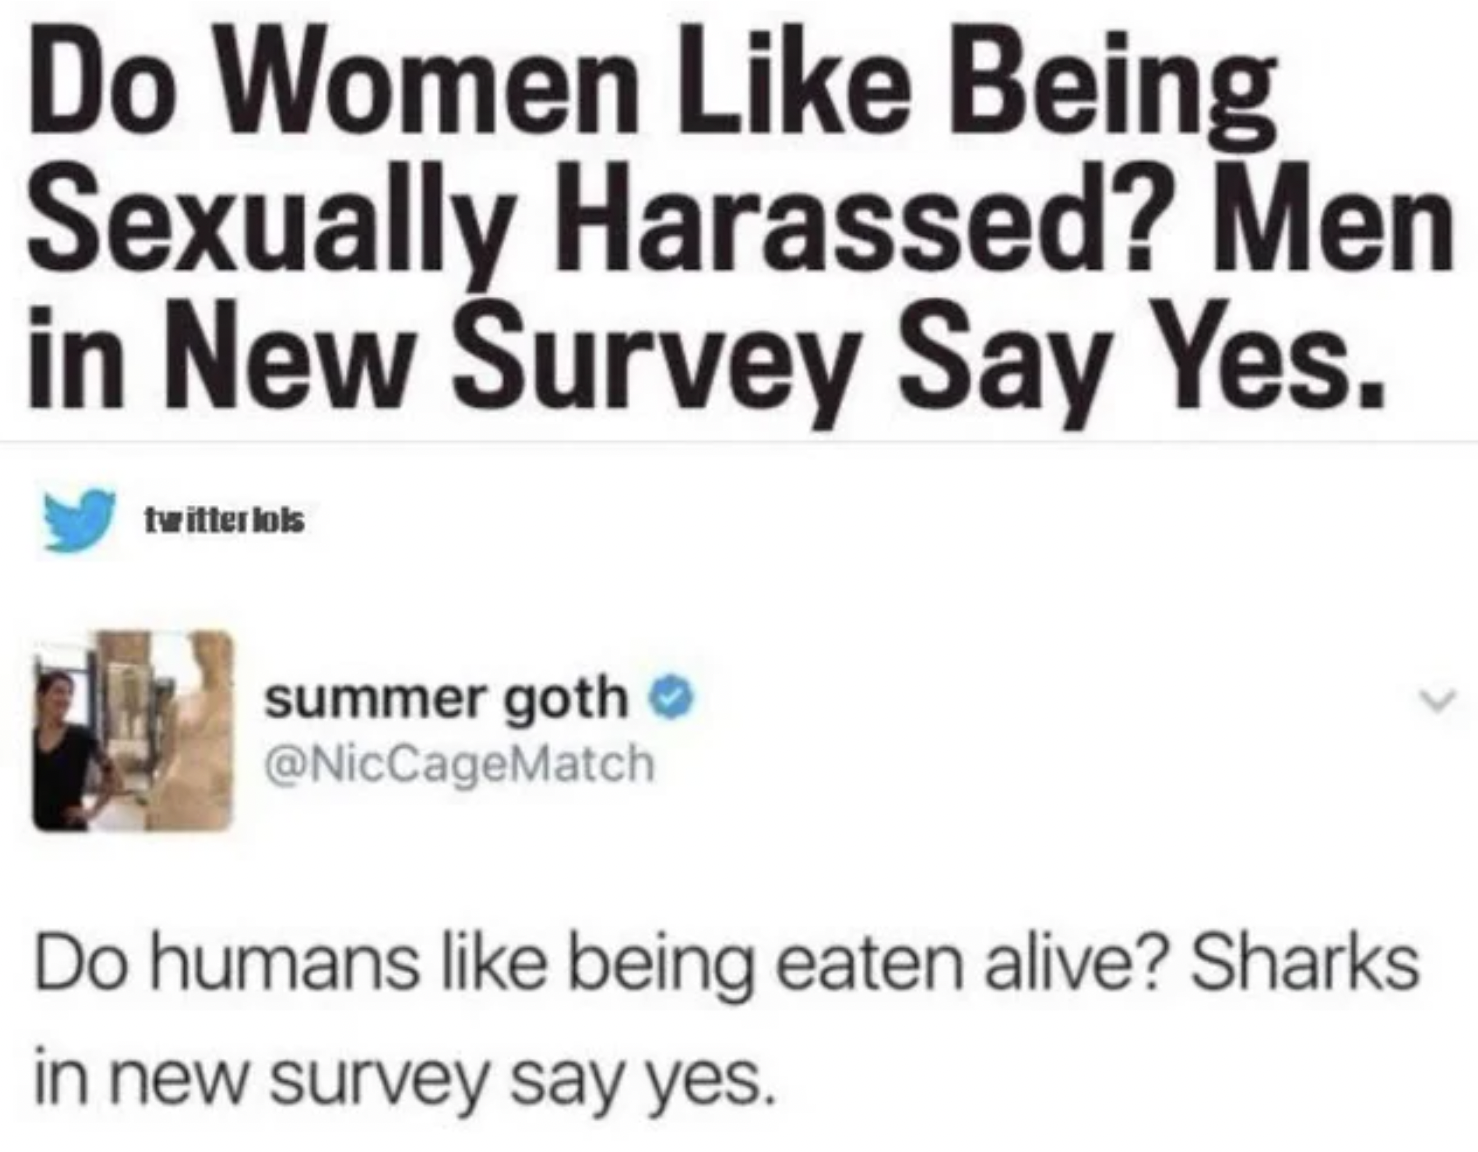 Facepalms - do women like being harassed - Do Women Being Sexually Harassed? Men in New Survey Say Yes. twitter lols summer goth Do humans being eaten alive? Sharks in new survey say yes.